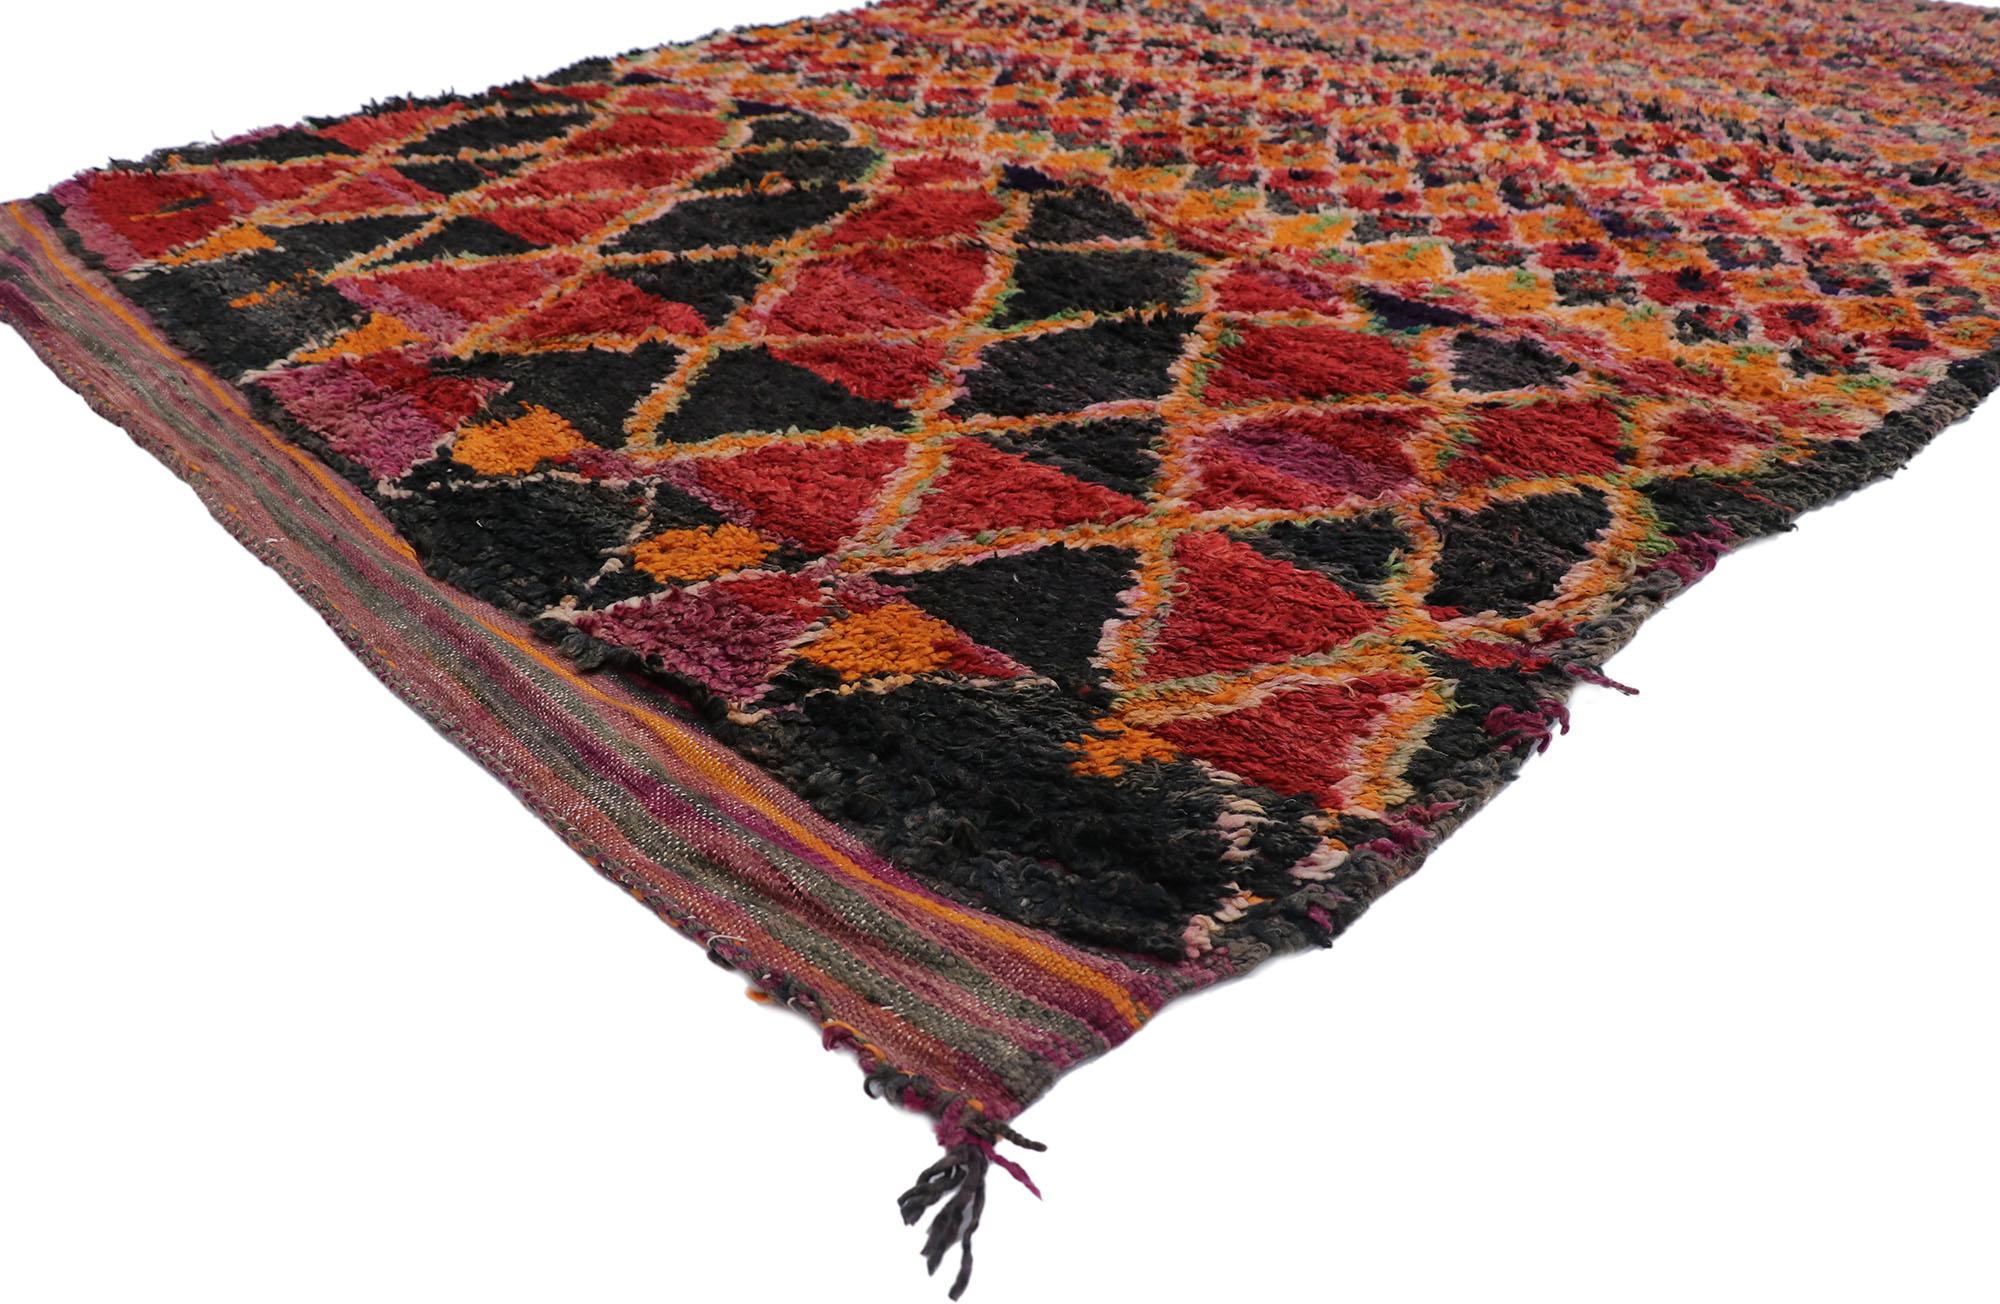 21284 Vintage Berber Moroccan Rug, 06'02 x 09'09.
Colorfully curated meets boho chic in this hand knotted wool vintage Berber Moroccan rug. The diamond design and rich earthy colors woven into this piece work together to bring forth an eclectic and